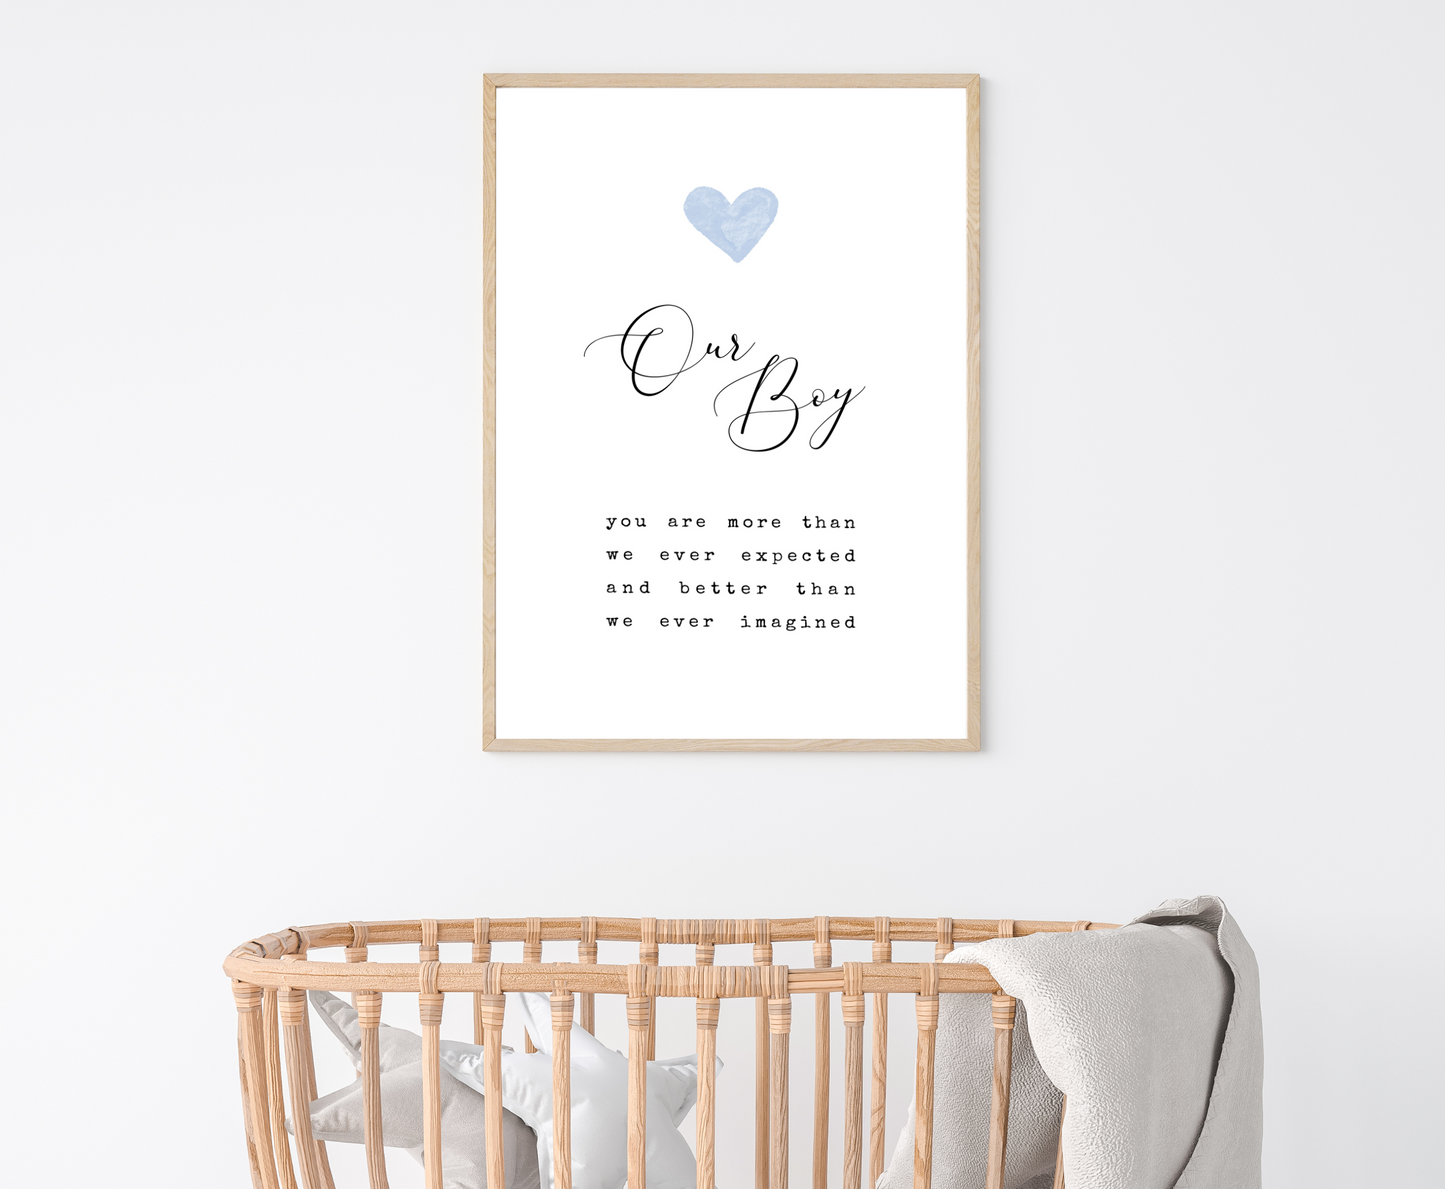 A little boy’s room digital print that is hung above a baby’s cradle and has a baby blue heart at the top, and a piece of writing that says: “Our boy, you are more than we ever expected and better than we ever imagined.”